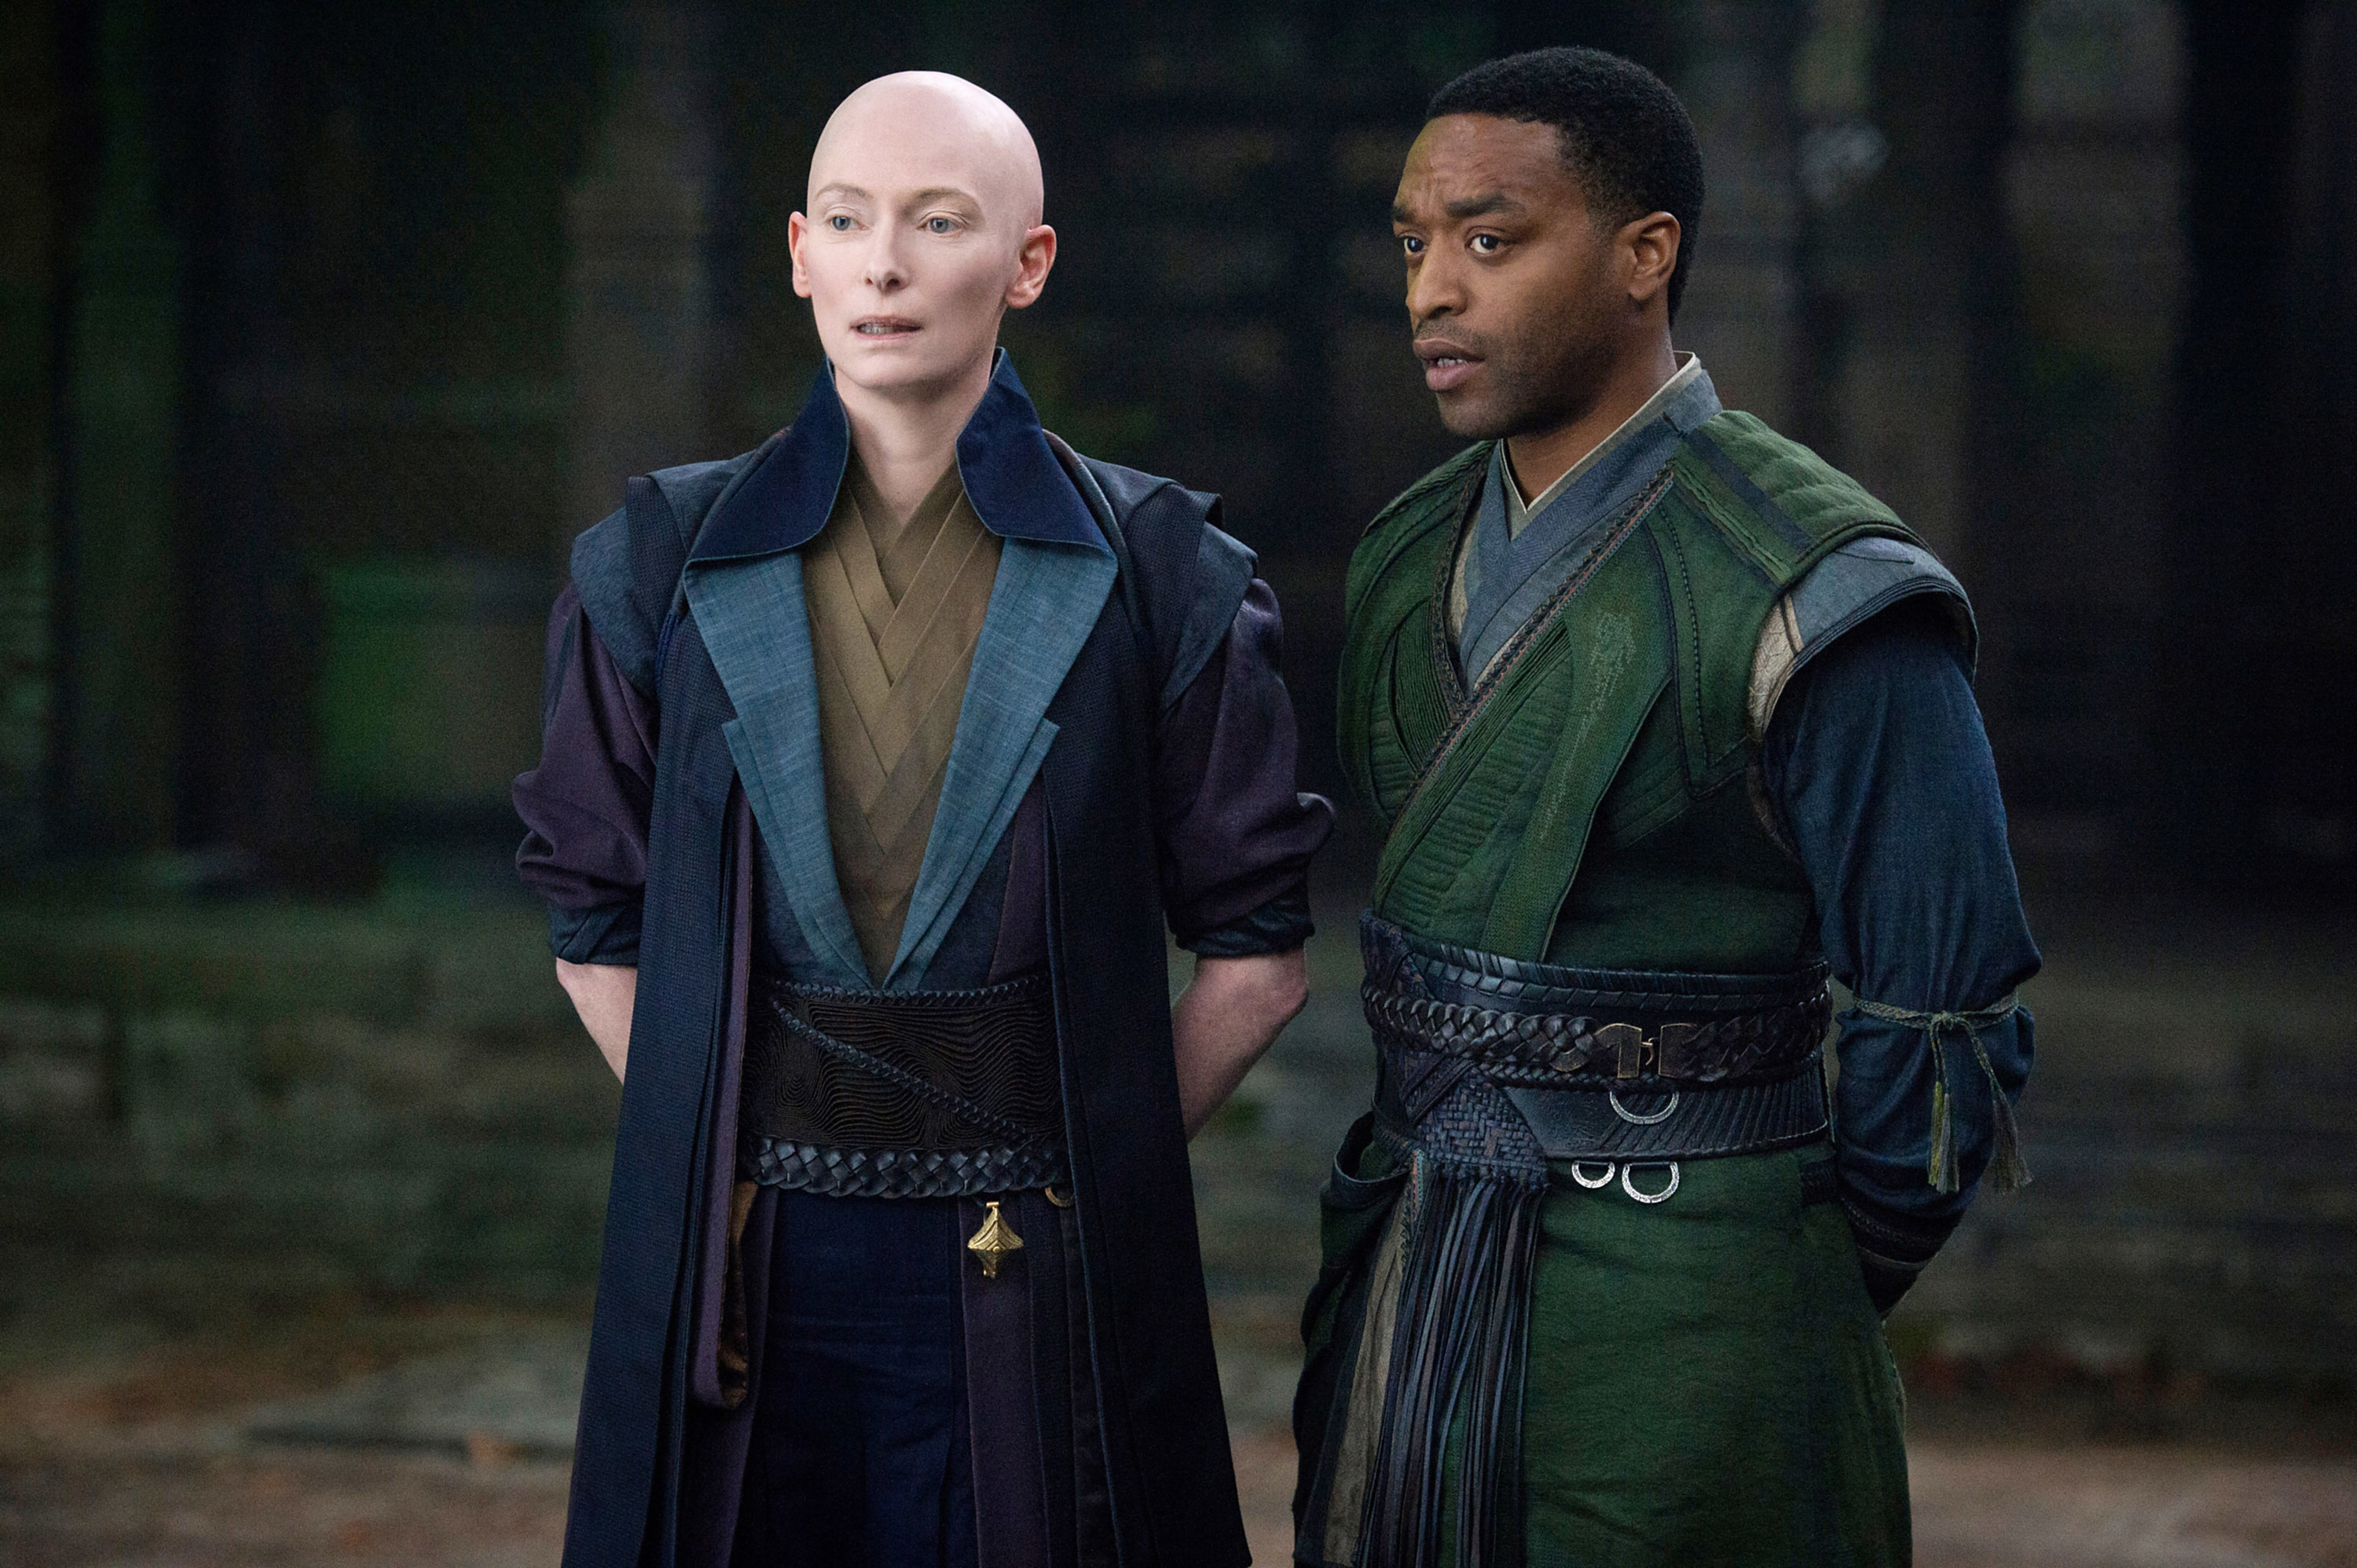 Tilda with a bald head for the role